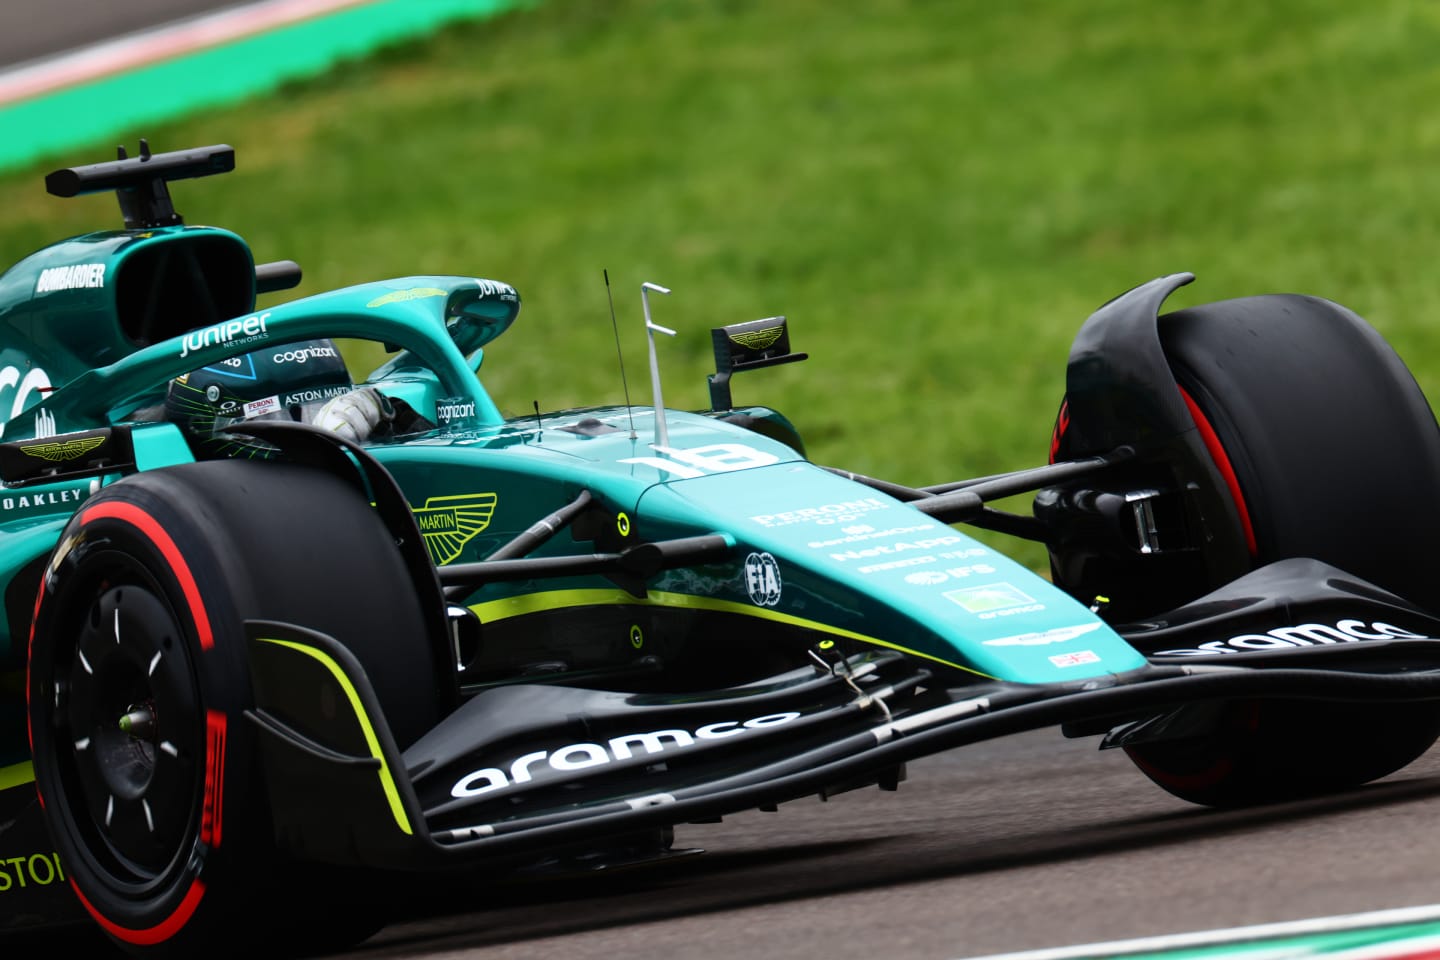 IMOLA, ITALY - APRIL 22: Lance Stroll of Canada driving the (18) Aston Martin AMR22 Mercedes on track during qualifying ahead of the F1 Grand Prix of Emilia Romagna at Autodromo Enzo e Dino Ferrari on April 22, 2022 in Imola, Italy. (Photo by Mark Thompson/Getty Images)